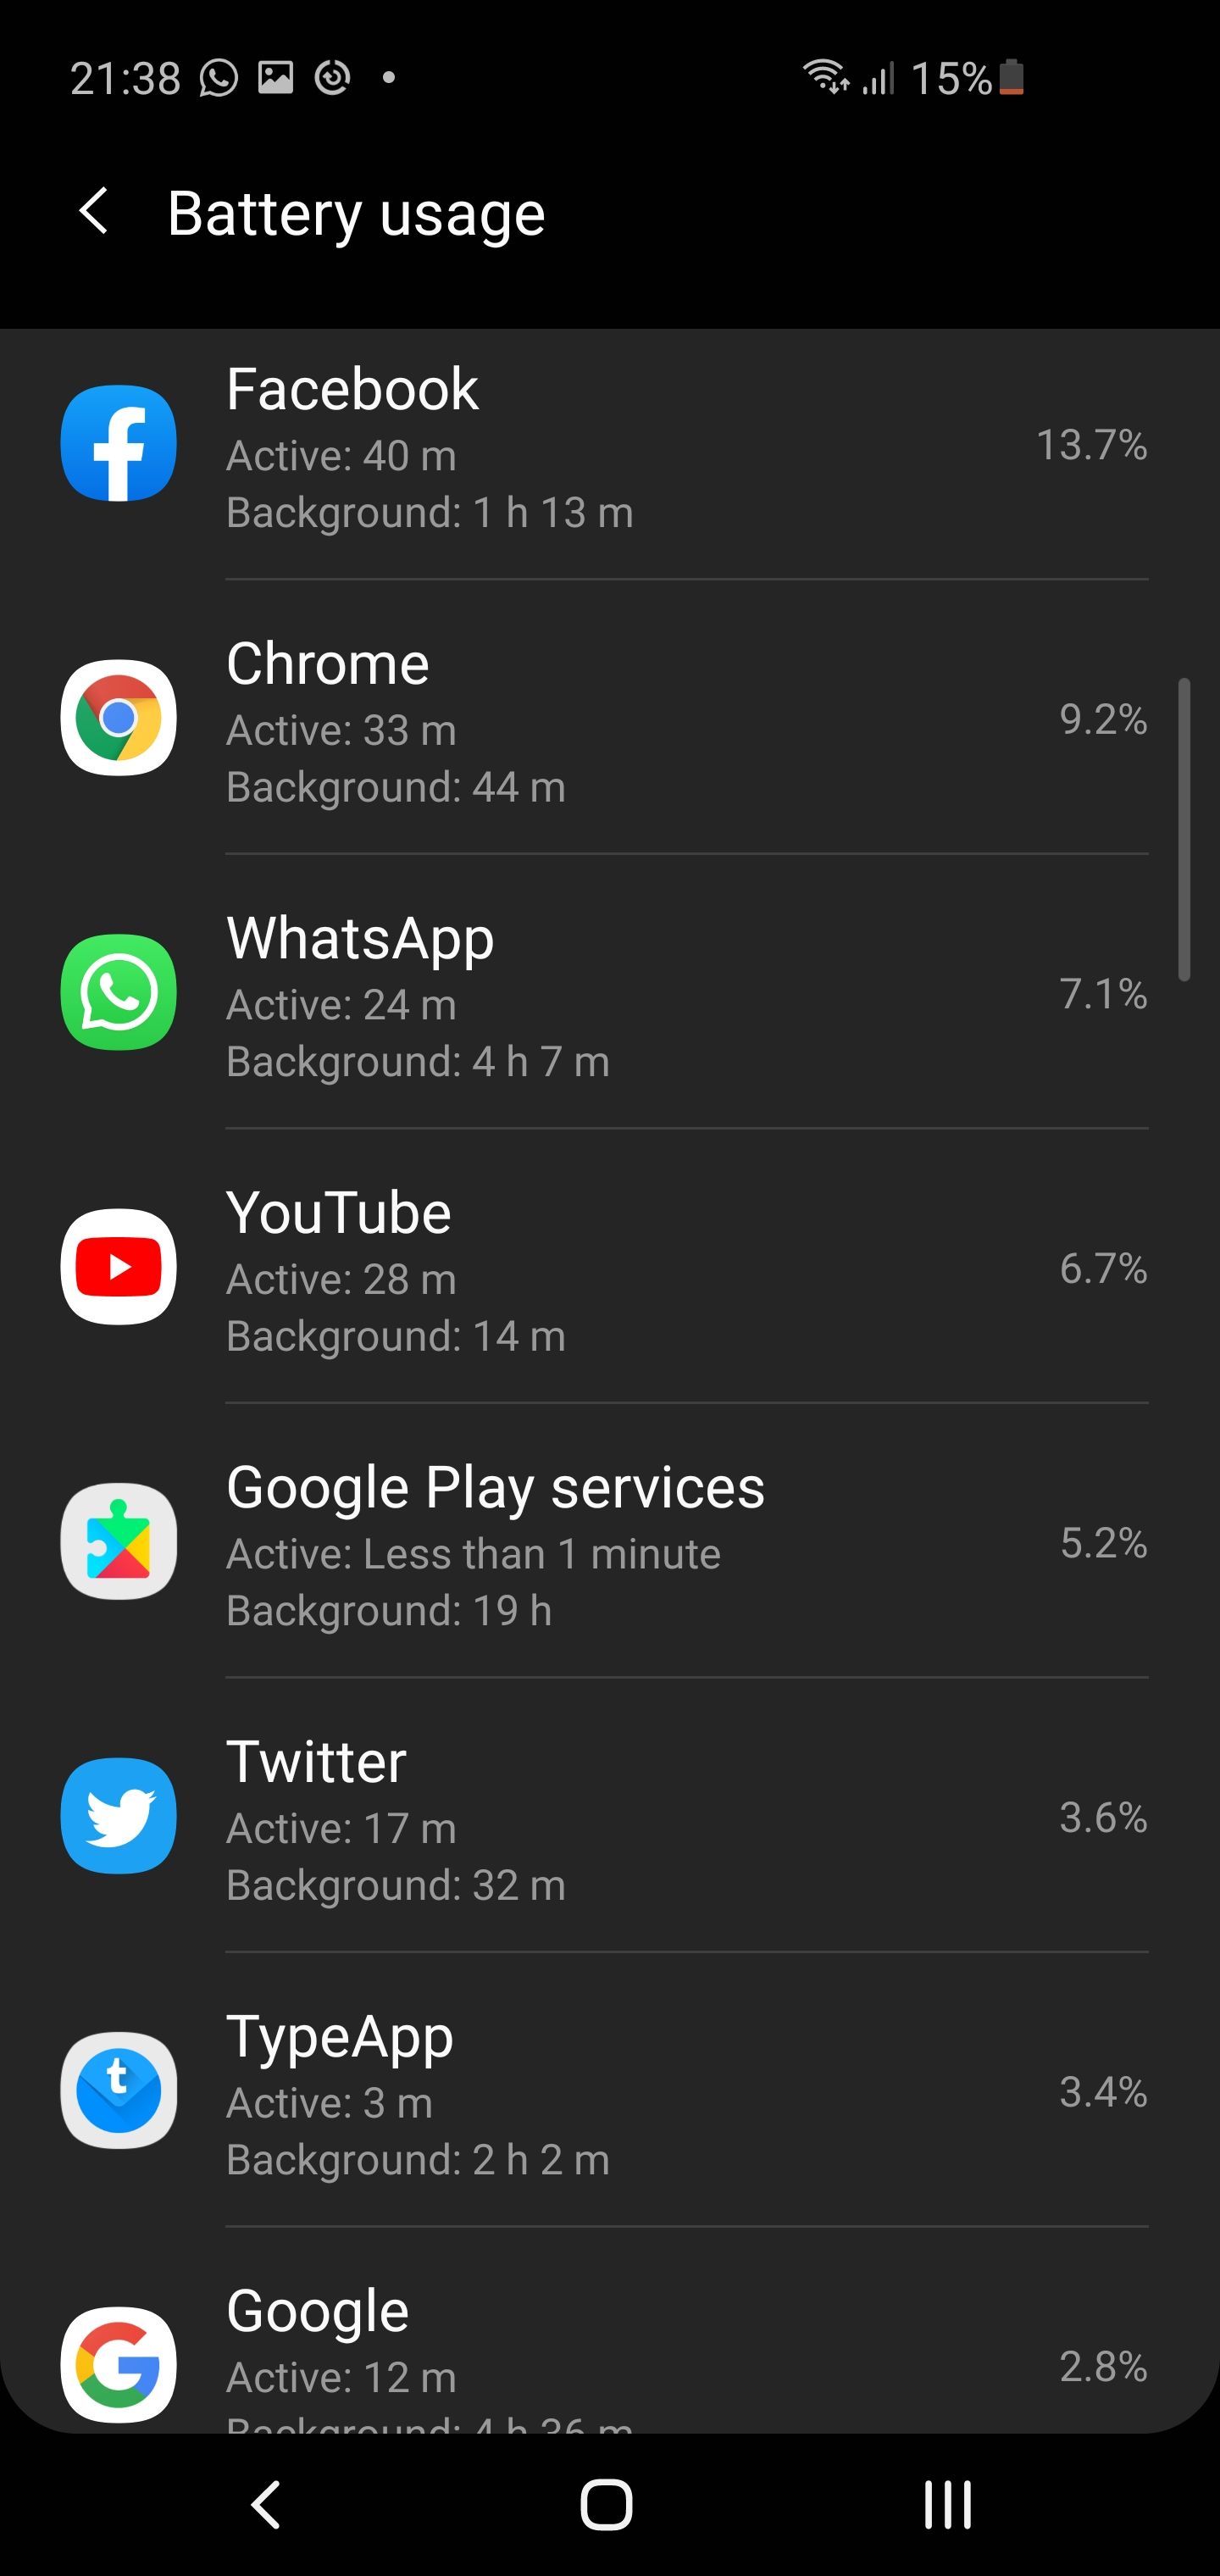 Why is my battery drain so fast (4 hr screen time)? - Samsung Community